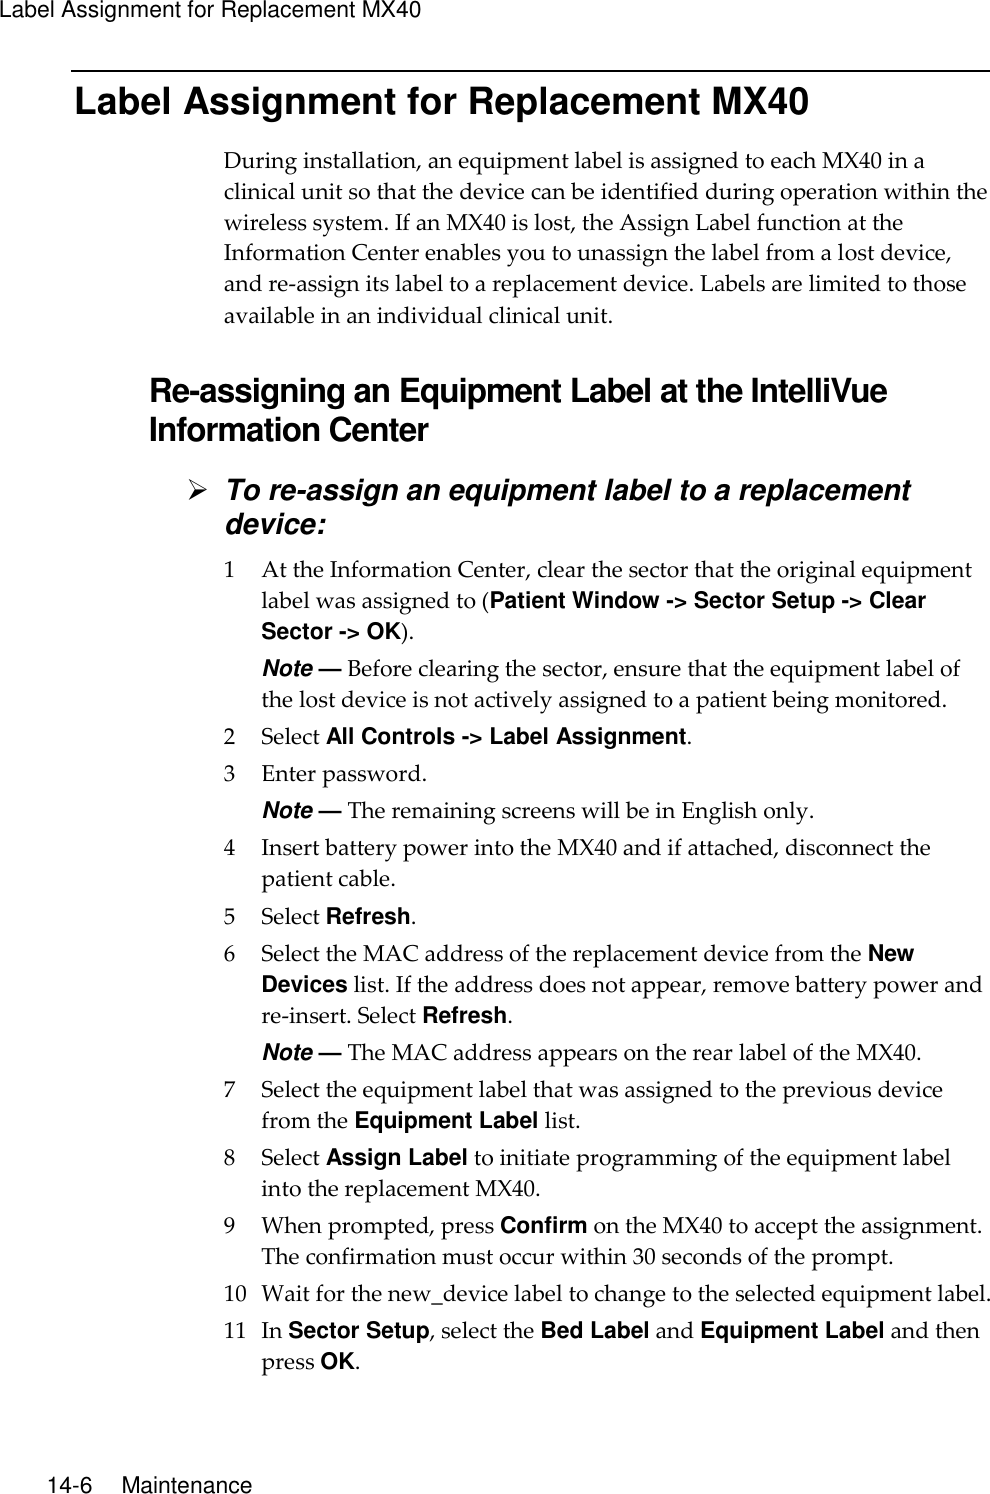 Label Assignment for Replacement MX40  14-6    Maintenance Label Assignment for Replacement MX40 During installation, an equipment label is assigned to each MX40 in a clinical unit so that the device can be identified during operation within the wireless system. If an MX40 is lost, the Assign Label function at the Information Center enables you to unassign the label from a lost device, and re-assign its label to a replacement device. Labels are limited to those available in an individual clinical unit.  Re-assigning an Equipment Label at the IntelliVue Information Center  To re-assign an equipment label to a replacement device: 1 At the Information Center, clear the sector that the original equipment label was assigned to (Patient Window -&gt; Sector Setup -&gt; Clear Sector -&gt; OK). Note — Before clearing the sector, ensure that the equipment label of the lost device is not actively assigned to a patient being monitored. 2 Select All Controls -&gt; Label Assignment. 3 Enter password. Note — The remaining screens will be in English only. 4 Insert battery power into the MX40 and if attached, disconnect the patient cable. 5 Select Refresh. 6 Select the MAC address of the replacement device from the New Devices list. If the address does not appear, remove battery power and re-insert. Select Refresh. Note — The MAC address appears on the rear label of the MX40. 7 Select the equipment label that was assigned to the previous device from the Equipment Label list. 8 Select Assign Label to initiate programming of the equipment label into the replacement MX40. 9 When prompted, press Confirm on the MX40 to accept the assignment. The confirmation must occur within 30 seconds of the prompt. 10 Wait for the new_device label to change to the selected equipment label. 11 In Sector Setup, select the Bed Label and Equipment Label and then press OK.  